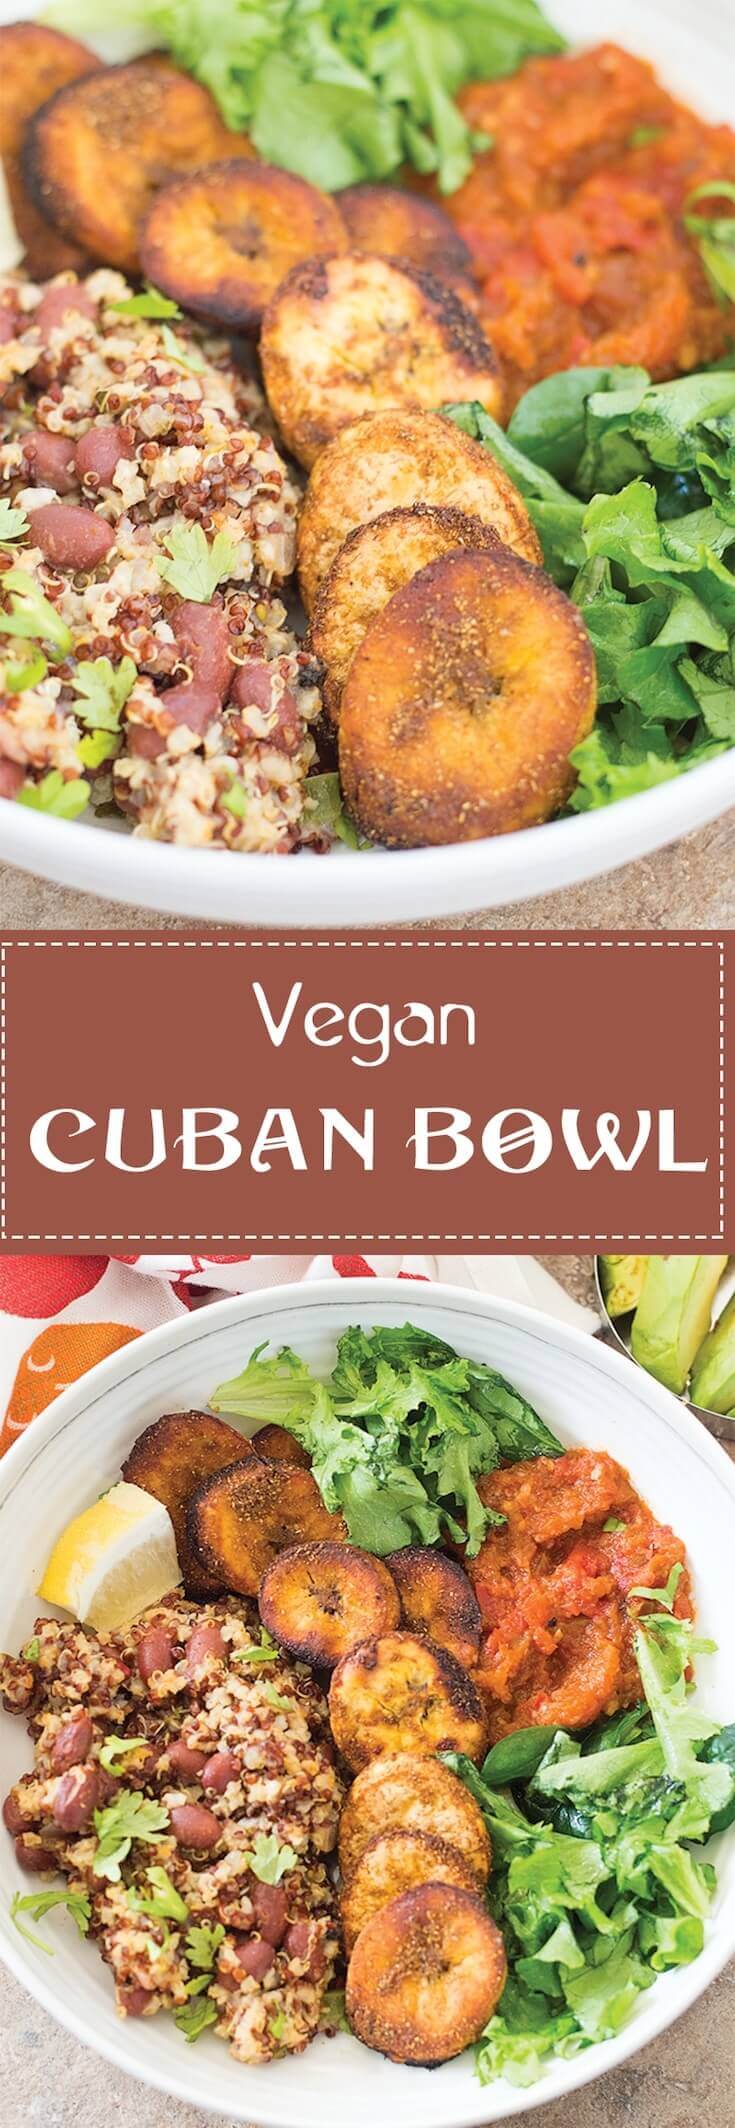 Delicious and hearty Cuban Bowl